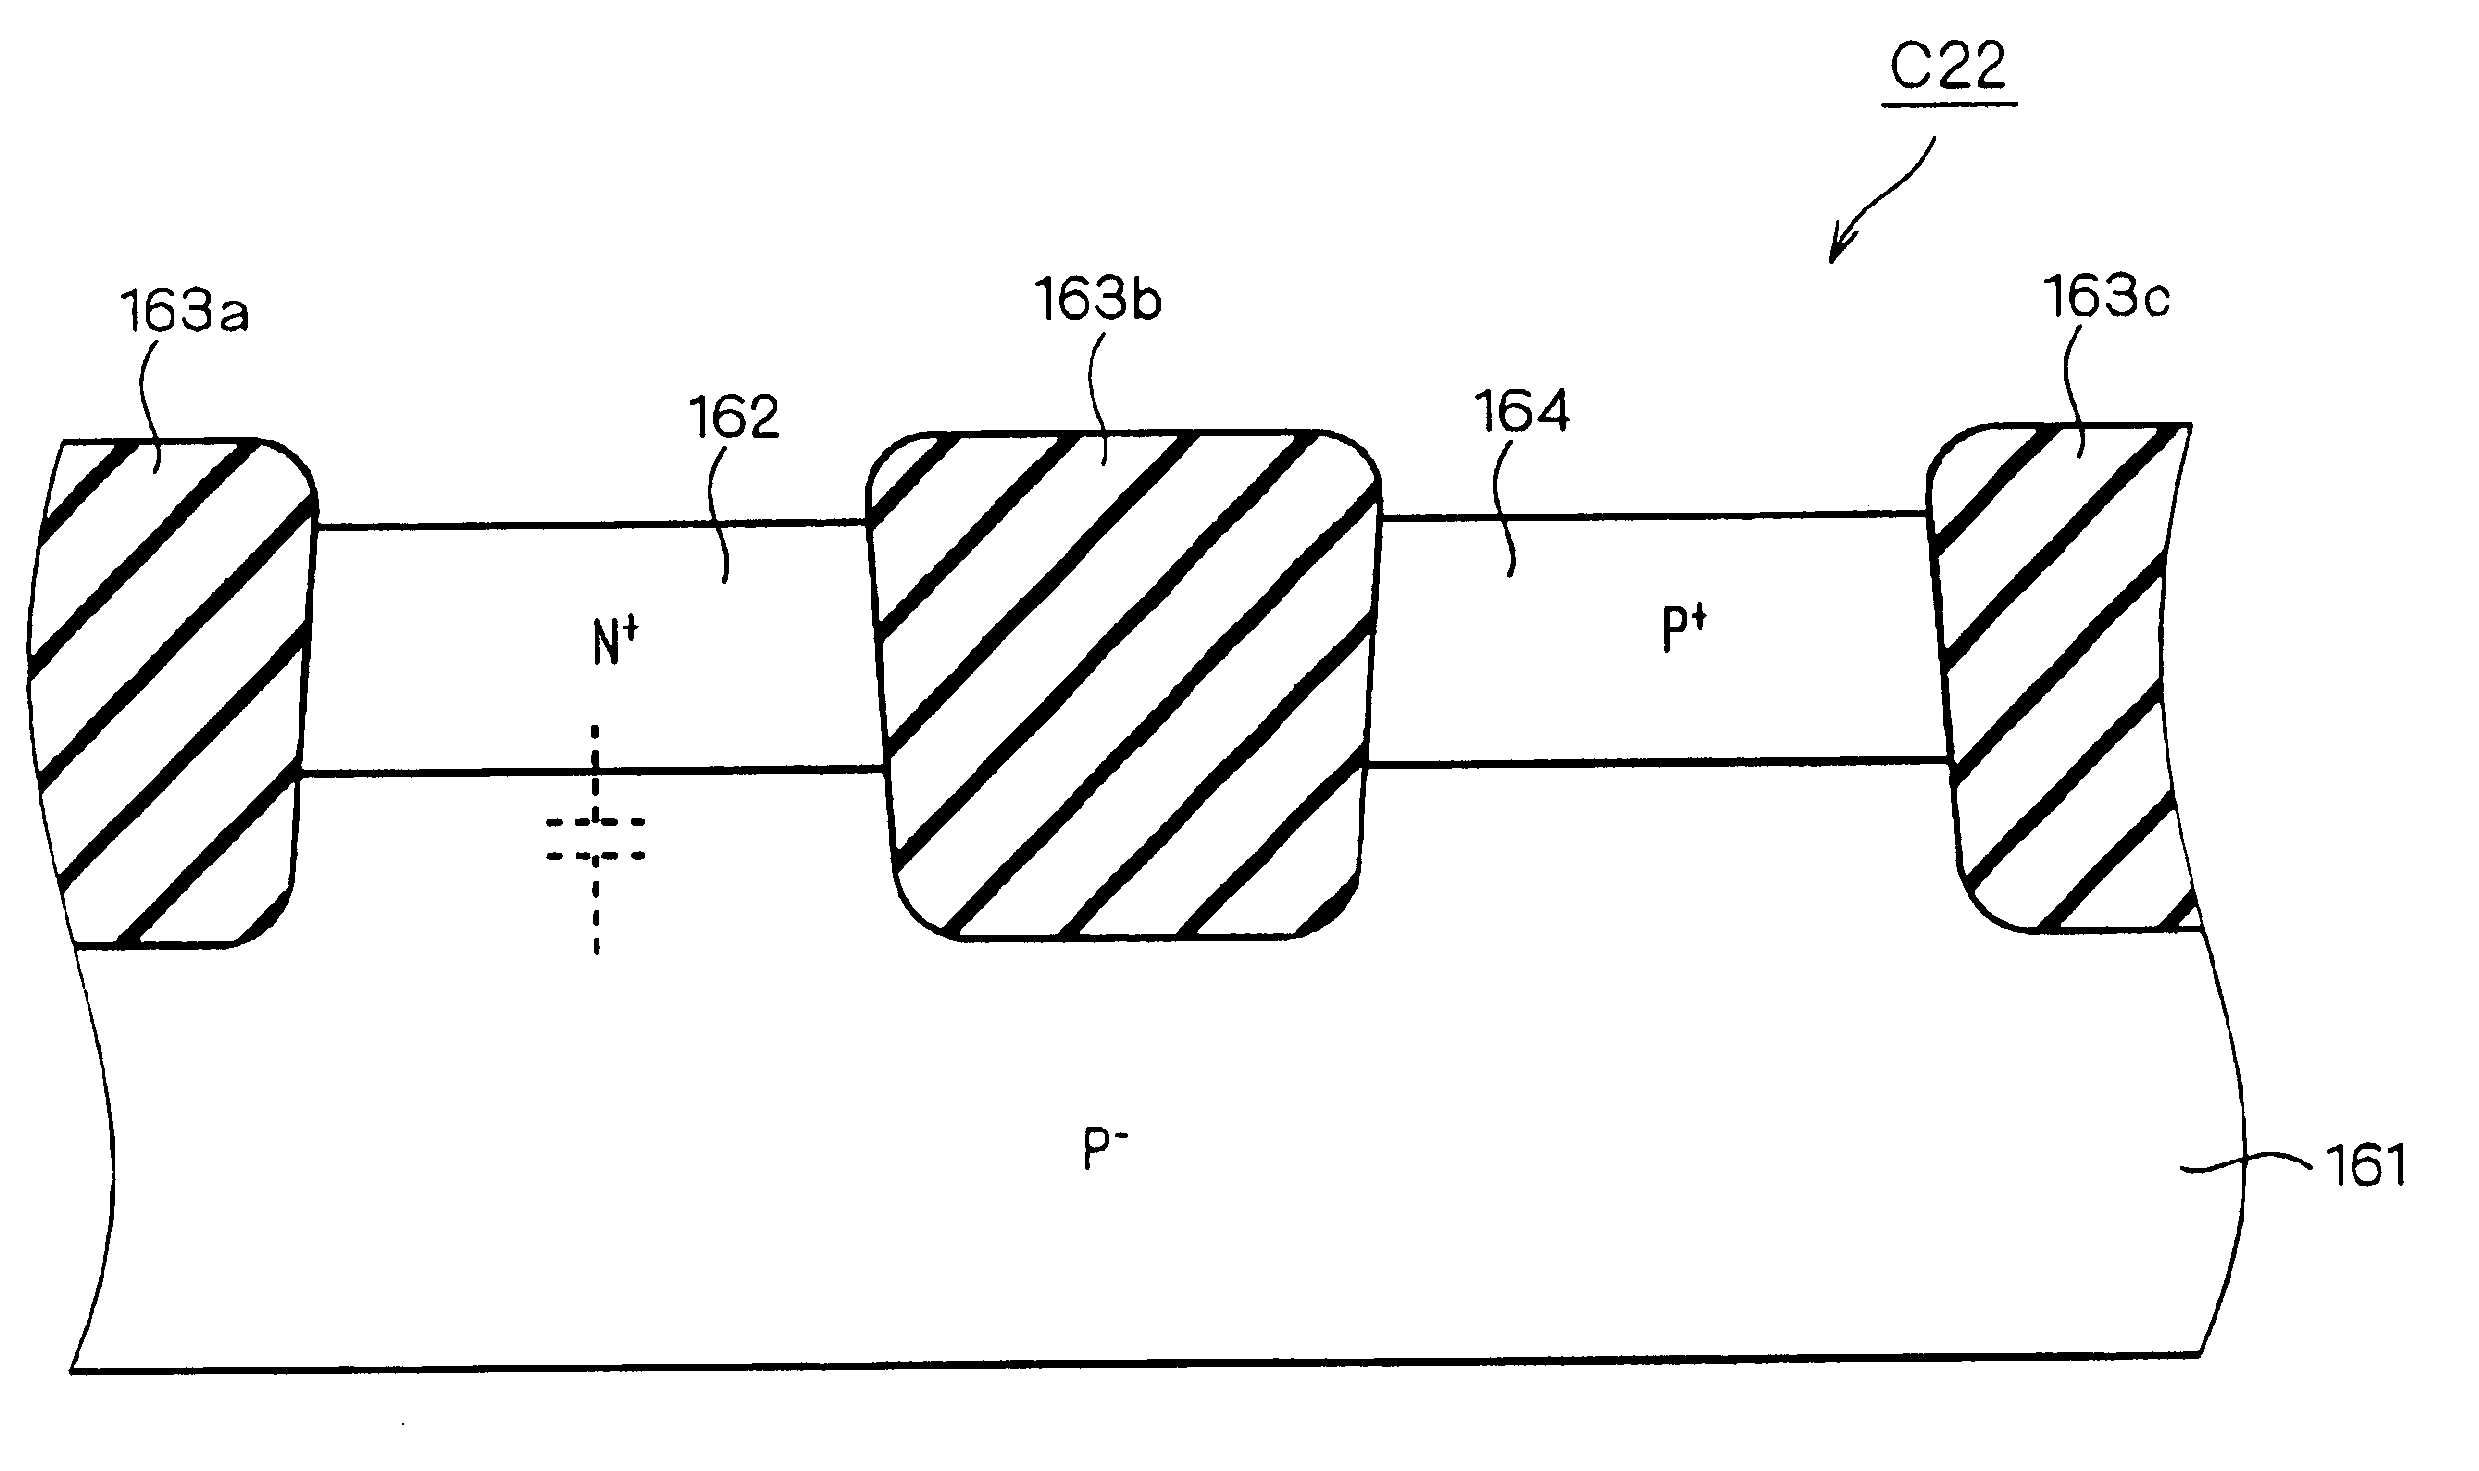 Semiconductor device including a capacitance